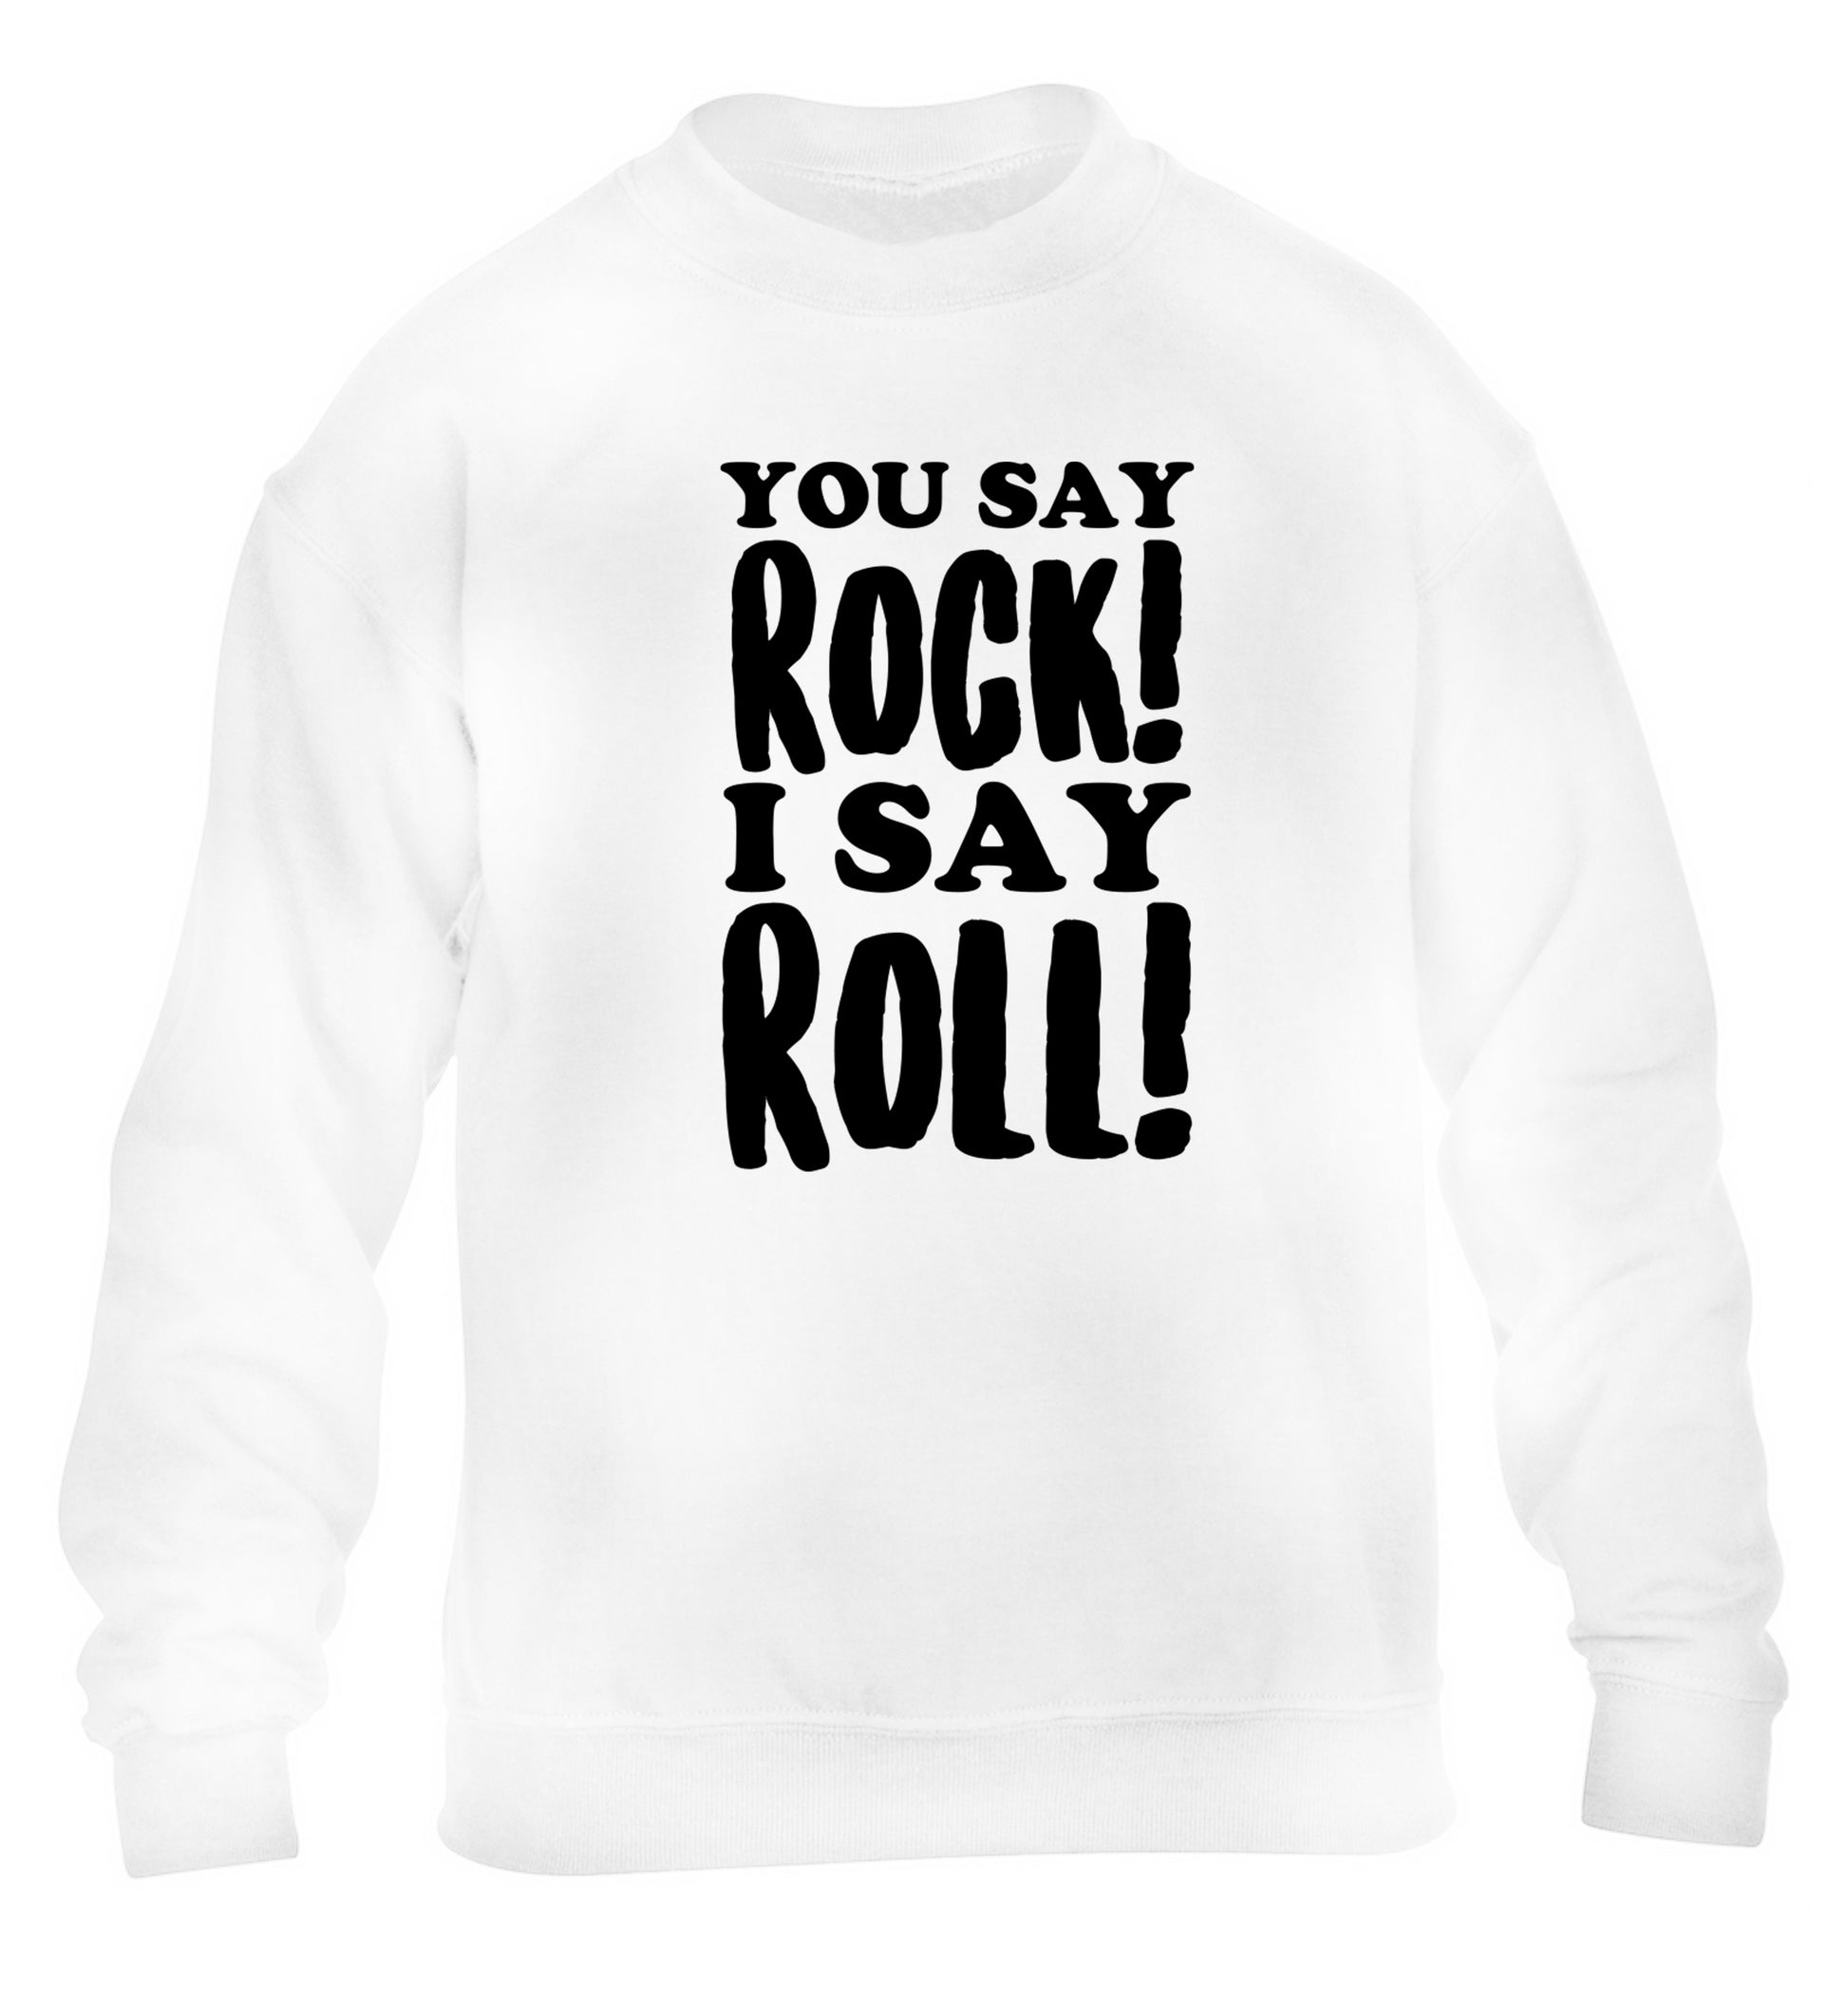 You say rock I say roll! children's white sweater 12-14 Years